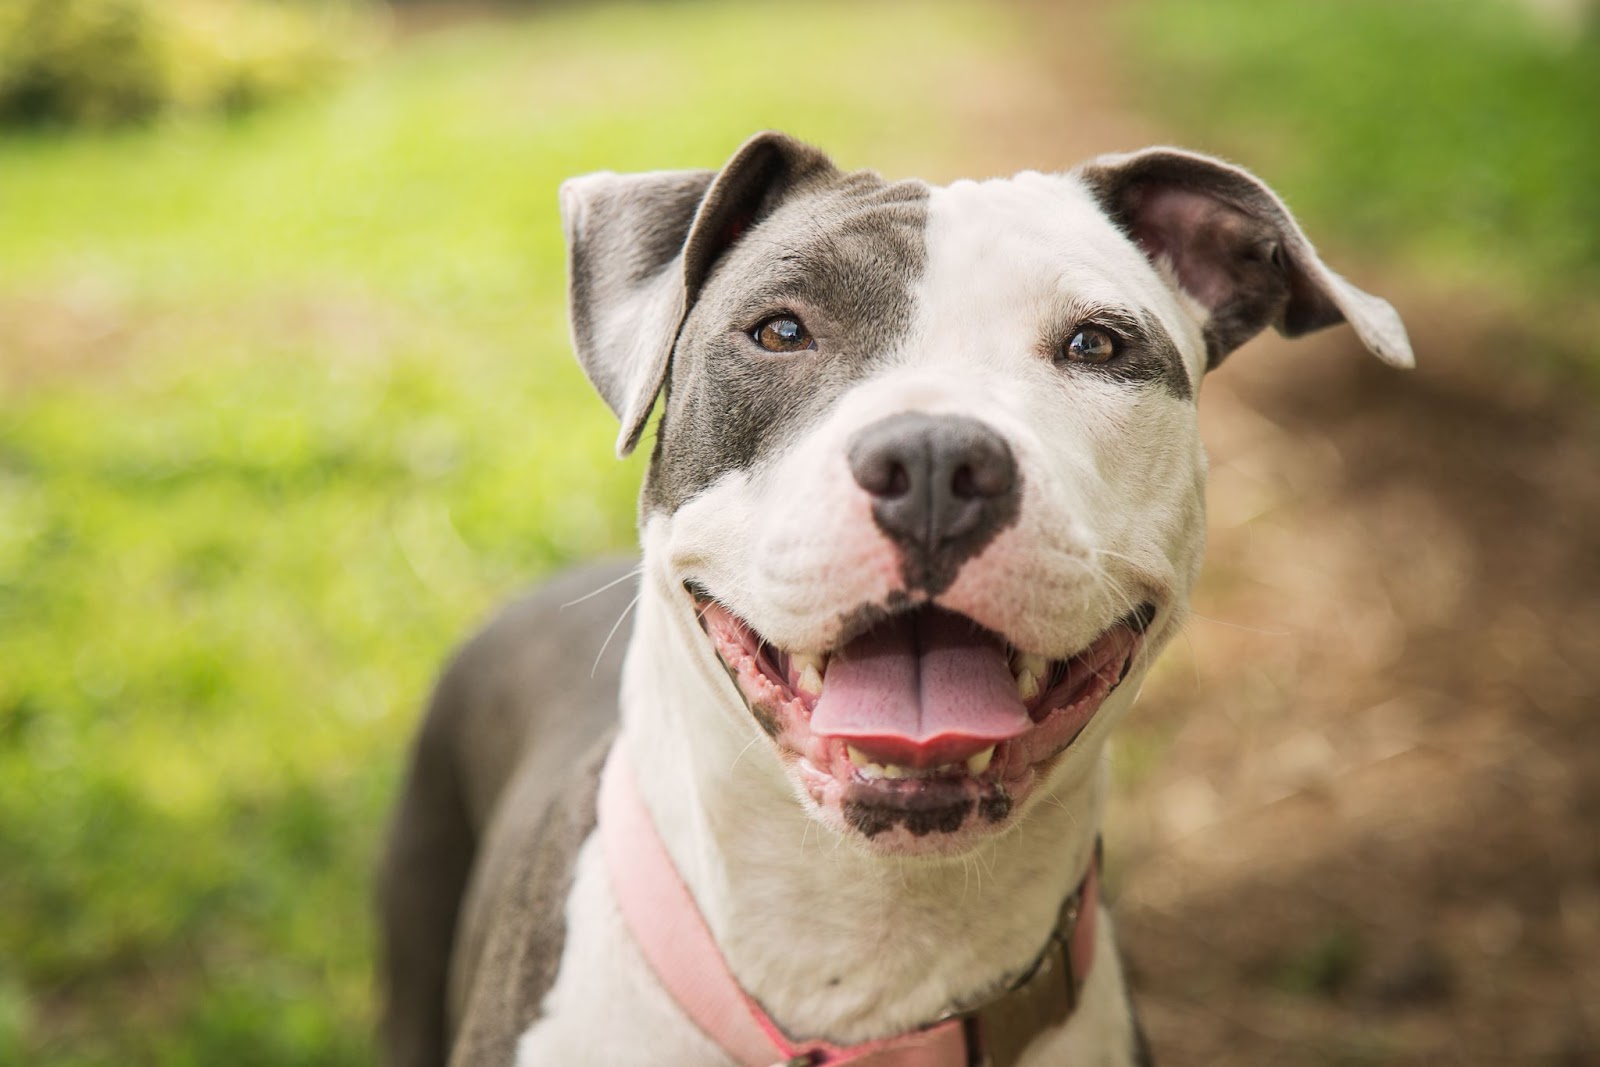 A pit bull smiling at the camera.